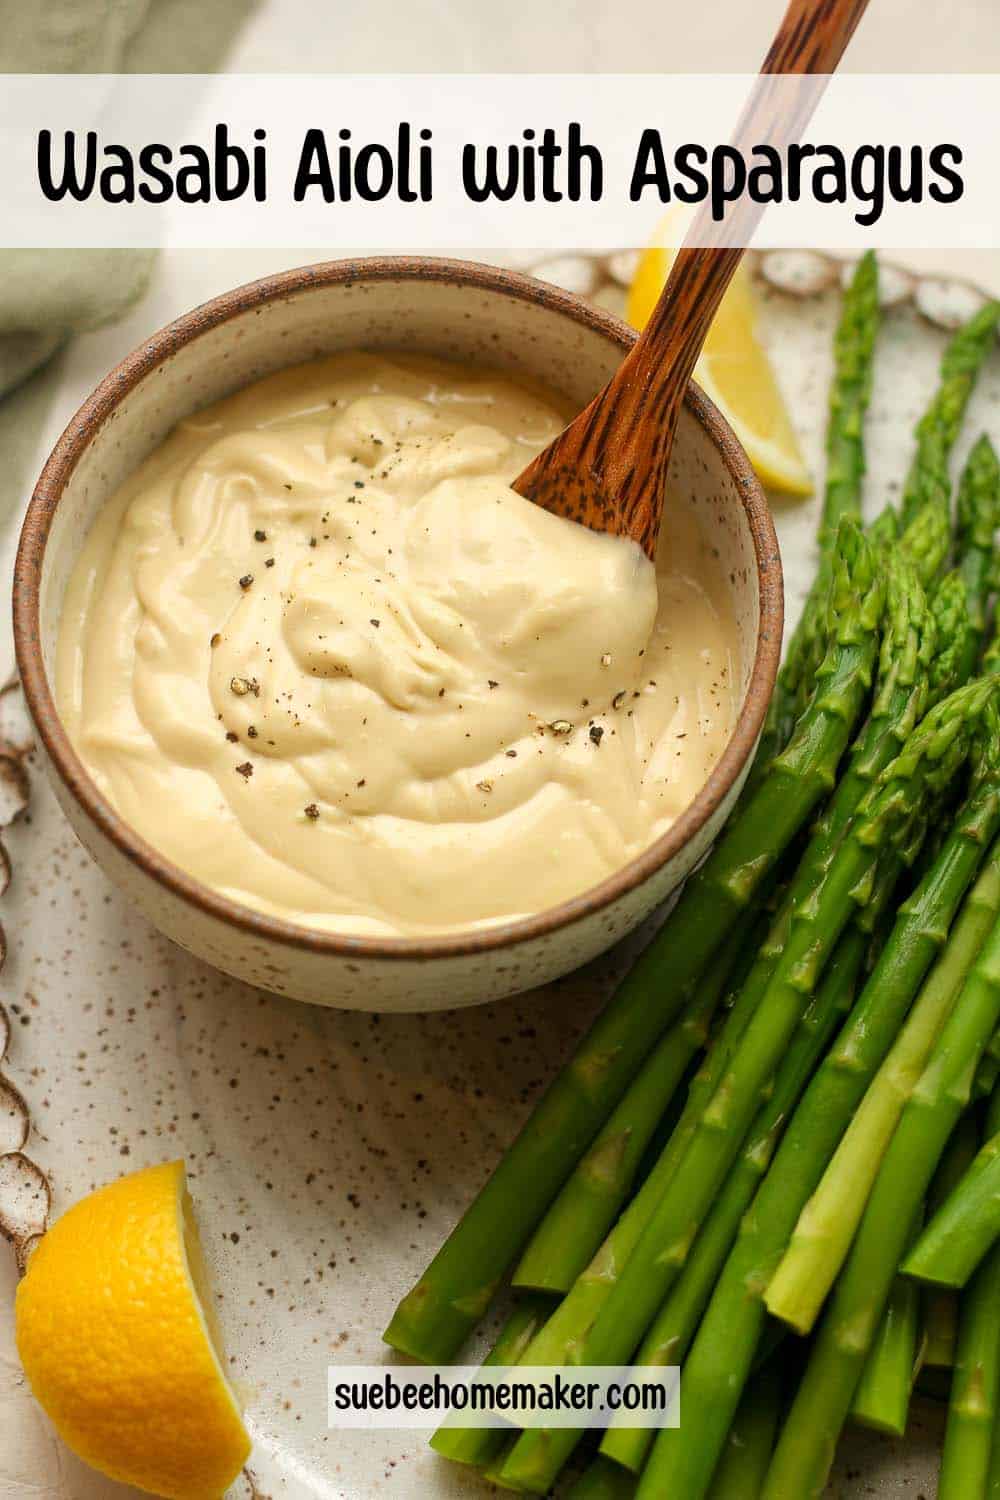 Overhead view of asparagus and aioli dip.